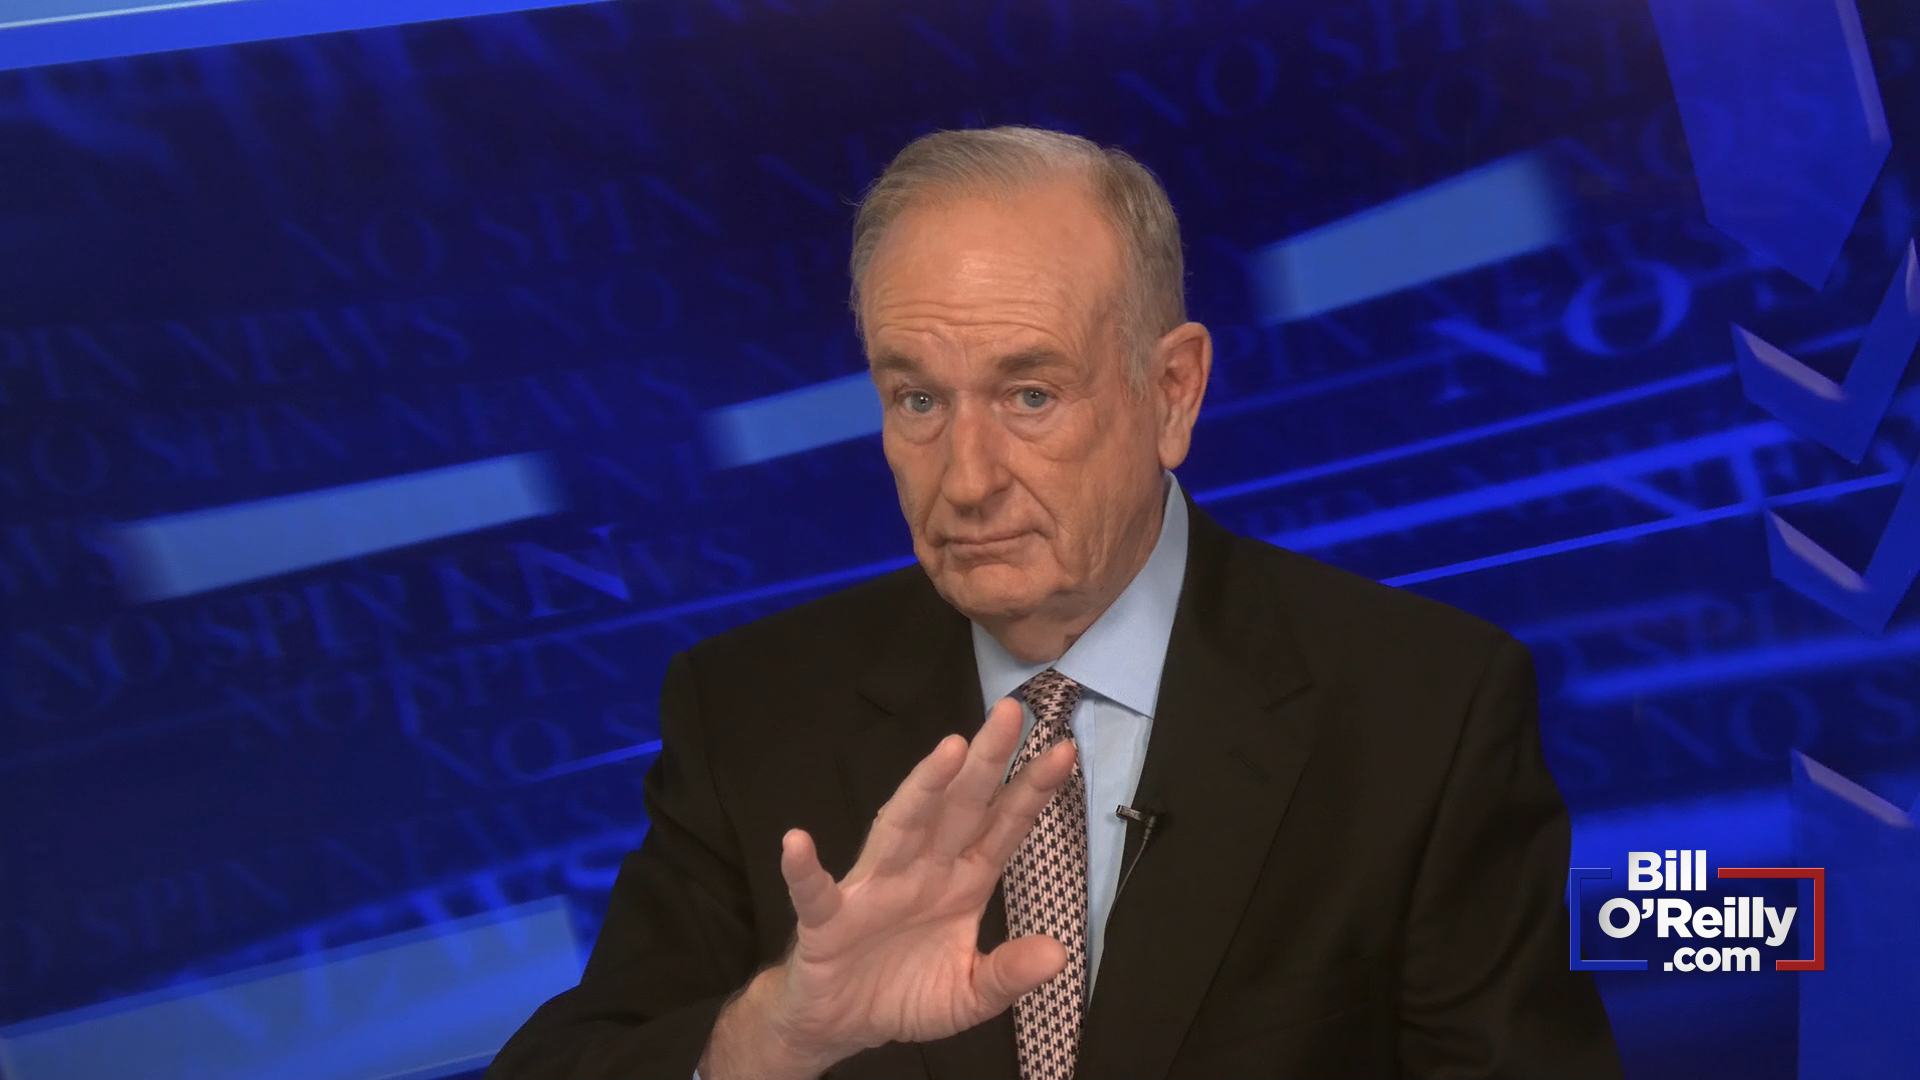 O'Reilly: Who Does this Border Bill Help?